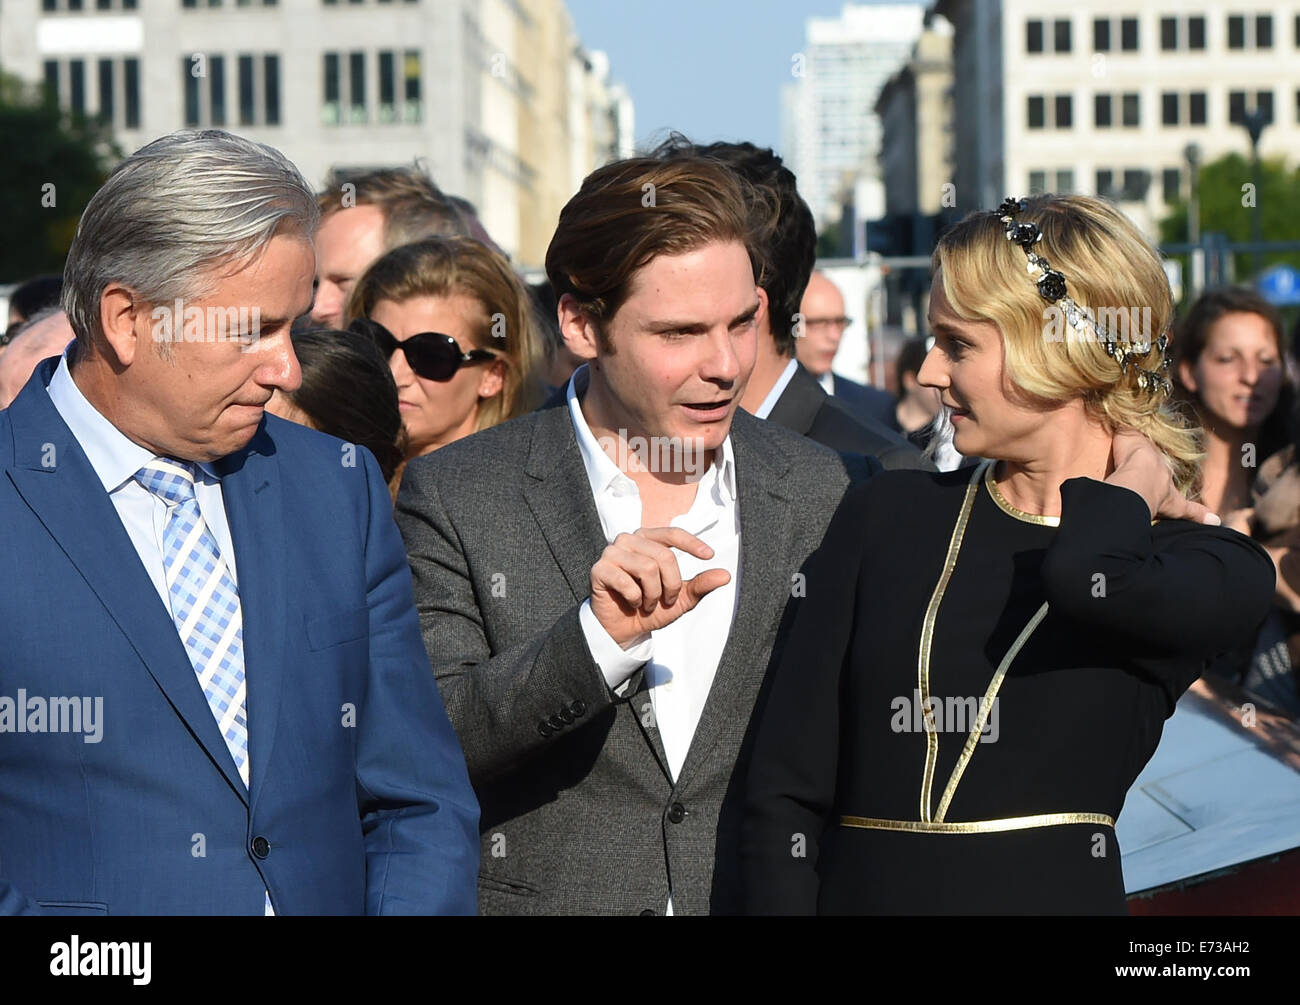 Potsdamer Platz, Berlin, Germany. 4th Sep, 2014. The Governing Mayor of Berlin Klaus Wowereit (L-R), actor Daniel Bruehl, and actress Diane Kruger talk at the re-opening ceremony of 'Boulevard of the Stars' at Potsdamer Platz, Berlin, Germany, 4 September 2014. There are 101 stars on the boulevard representing German film and TV celebrities. Photo: Jens Kalaene/dpa/Alamy Live News Stock Photo